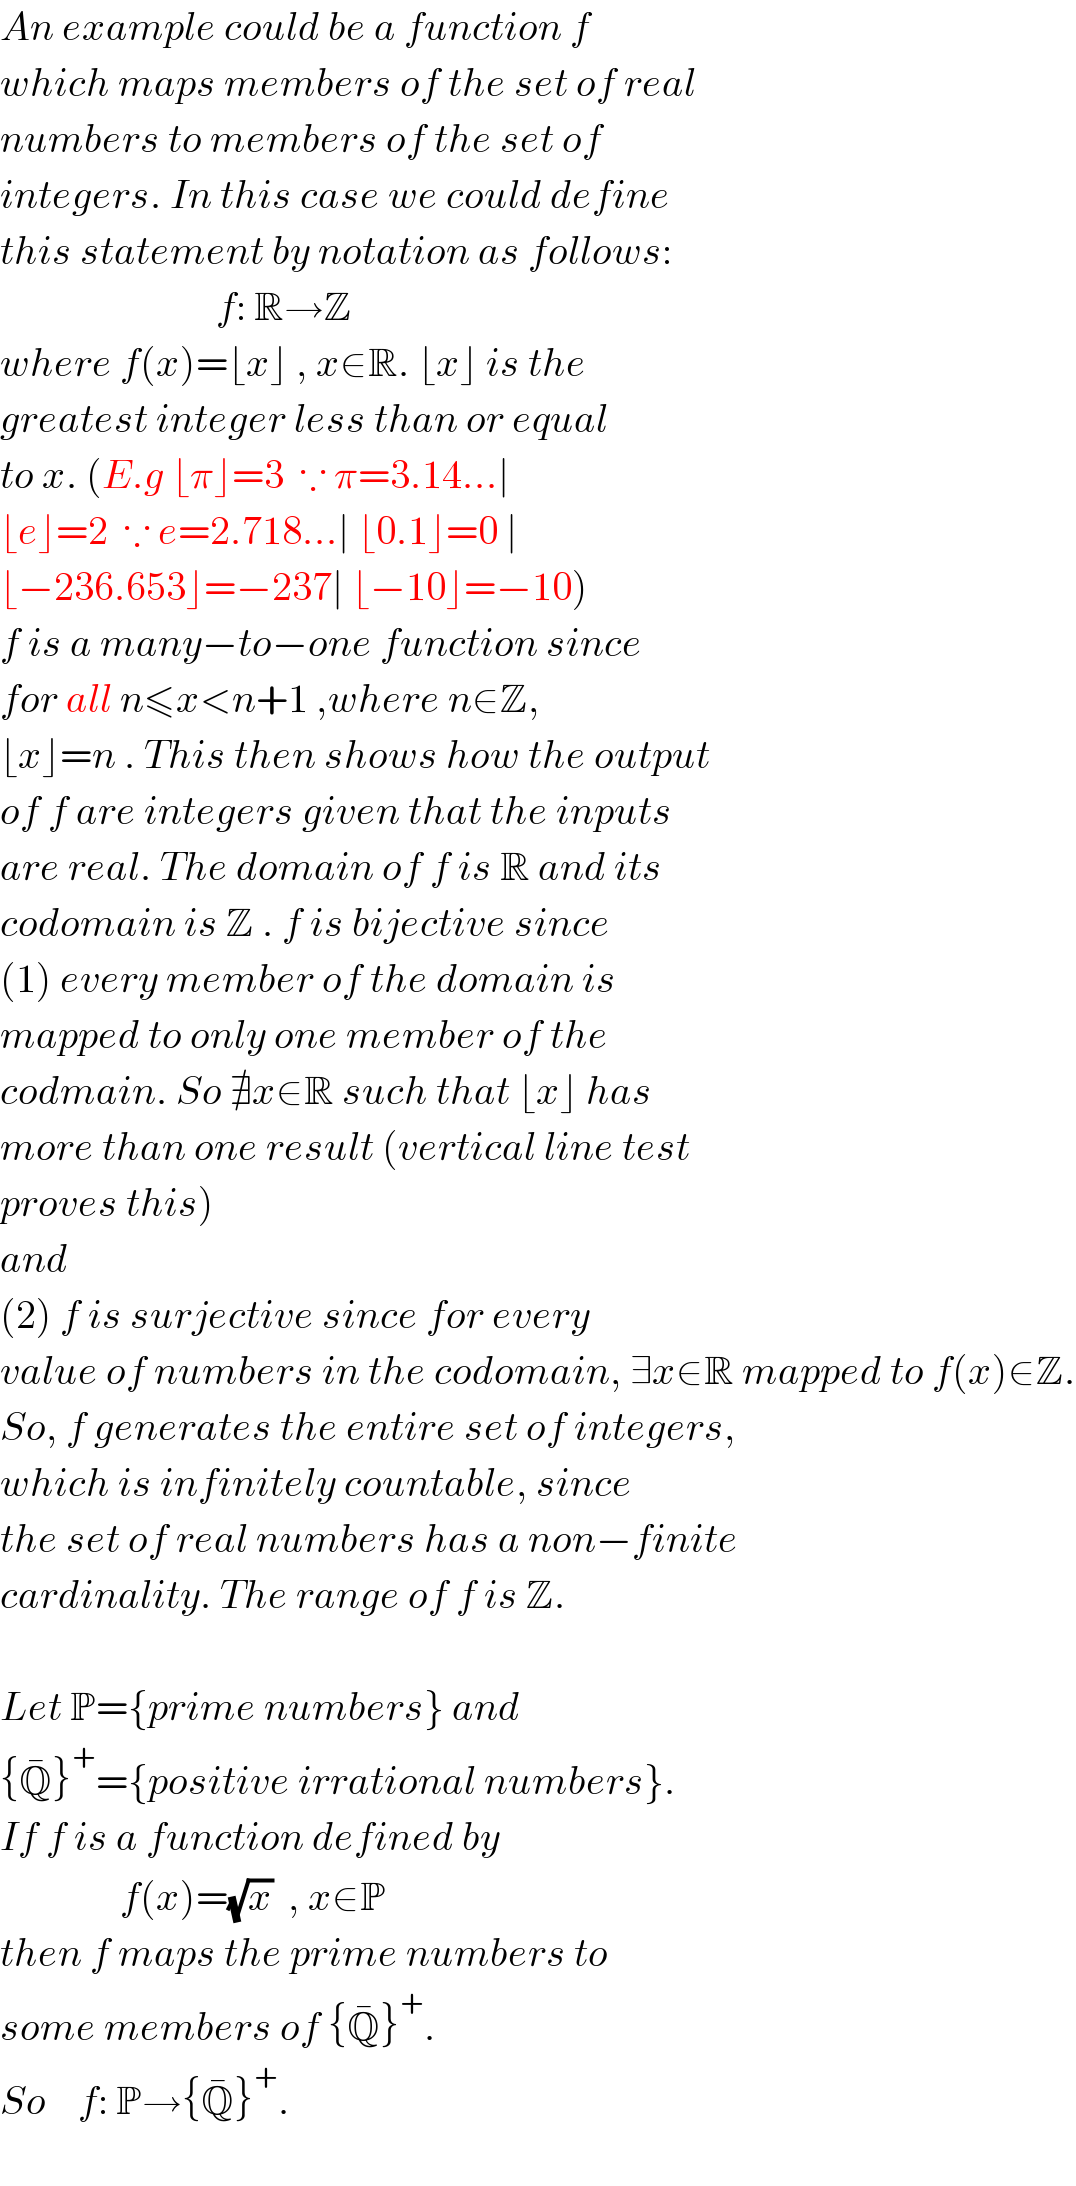 An example could be a function f  which maps members of the set of real  numbers to members of the set of  integers. In this case we could define  this statement by notation as follows:                             f: R→Z  where f(x)=⌊x⌋ , x∈R. ⌊x⌋ is the  greatest integer less than or equal  to x. (E.g ⌊π⌋=3  ∵ π=3.14...∣  ⌊e⌋=2  ∵ e=2.718...∣ ⌊0.1⌋=0 ∣  ⌊−236.653⌋=−237∣ ⌊−10⌋=−10)   f is a many−to−one function since  for all n≤x<n+1 ,where n∈Z,  ⌊x⌋=n . This then shows how the output  of f are integers given that the inputs  are real. The domain of f is R and its  codomain is Z . f is bijective since   (1) every member of the domain is  mapped to only one member of the   codmain. So ∄x∈R such that ⌊x⌋ has  more than one result (vertical line test  proves this)  and  (2) f is surjective since for every   value of numbers in the codomain, ∃x∈R mapped to f(x)∈Z.  So, f generates the entire set of integers,  which is infinitely countable, since  the set of real numbers has a non−finite  cardinality. The range of f is Z.    Let P={prime numbers} and  {Q^� }^+ ={positive irrational numbers}.  If f is a function defined by                 f(x)=(√x)  , x∈P  then f maps the prime numbers to  some members of {Q^� }^+ .  So    f: P→{Q^� }^+ .    